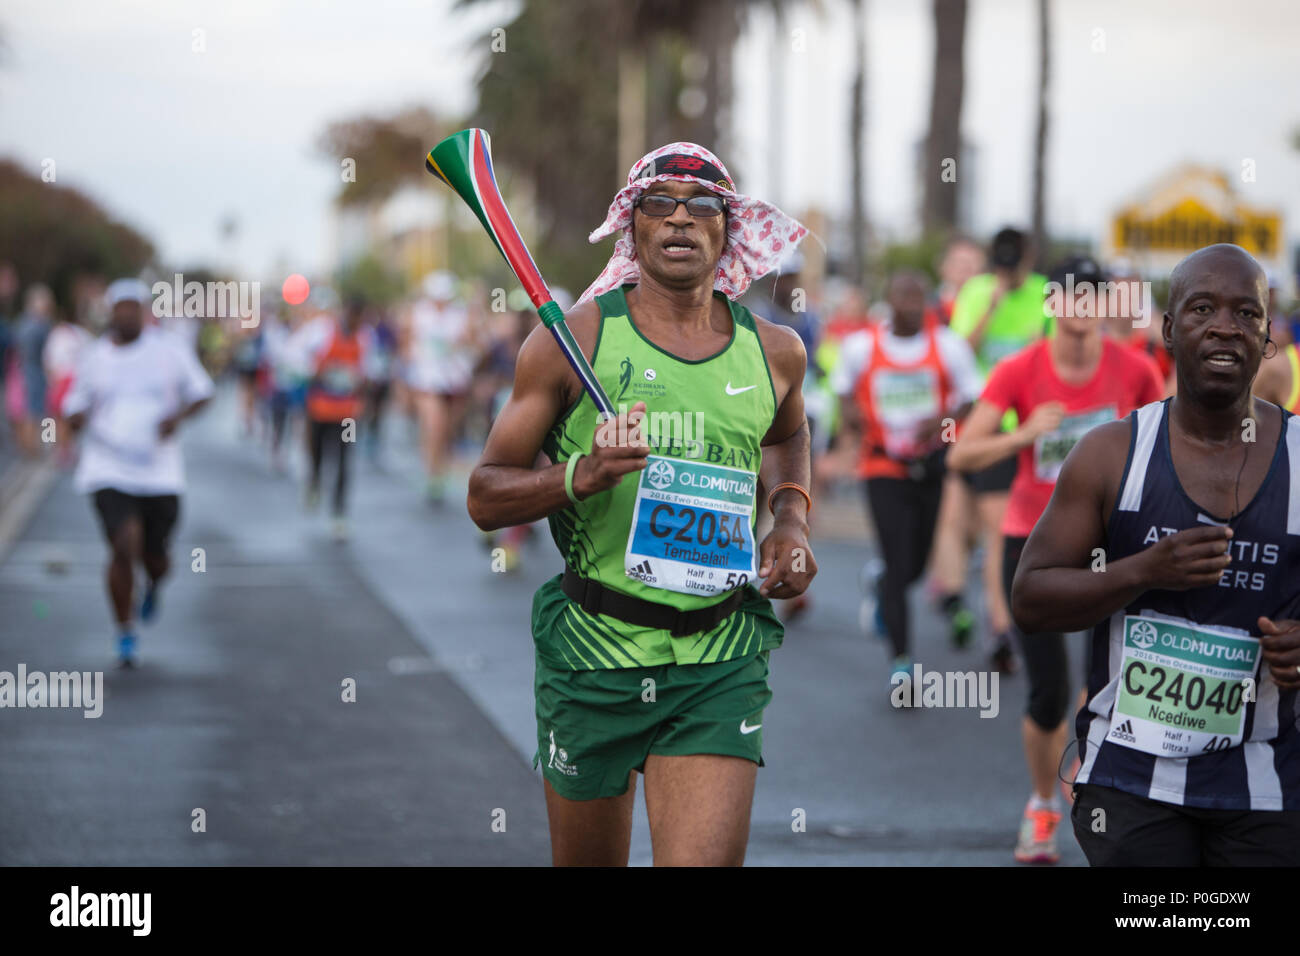 A runner carrying the vuvuzela instrument painted with the south African flag during the two oceans marathon Stock Photo